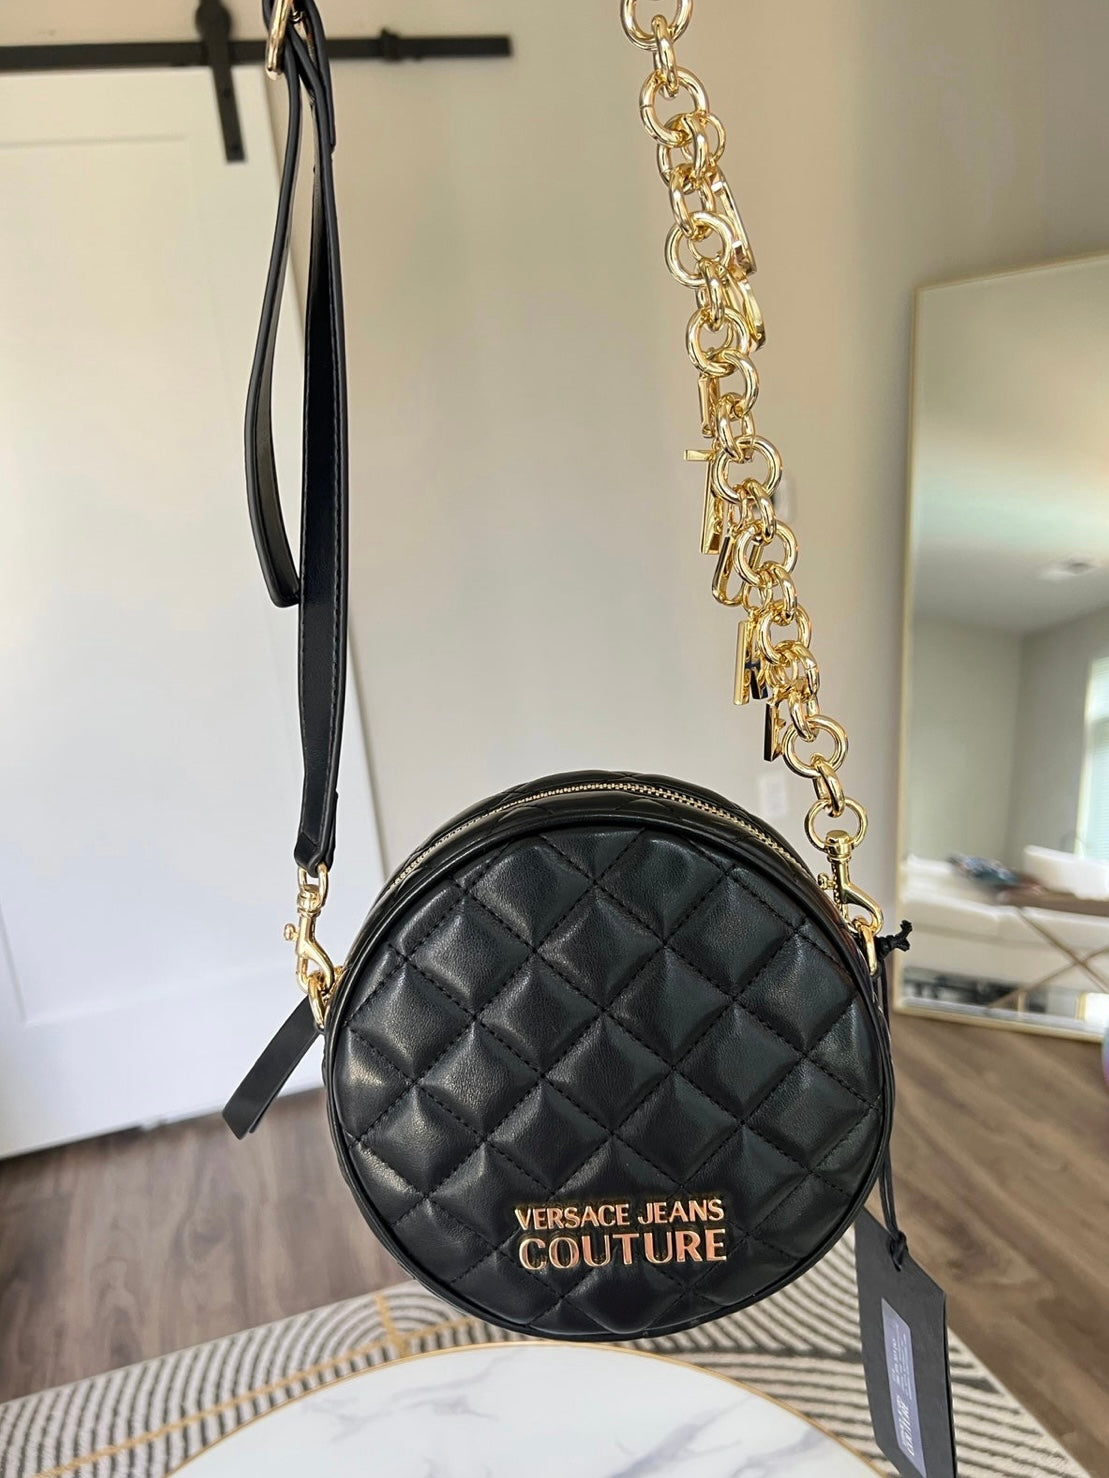 Versace Jeans Couture Black Round Crossbody, 100% AUTHENTIC